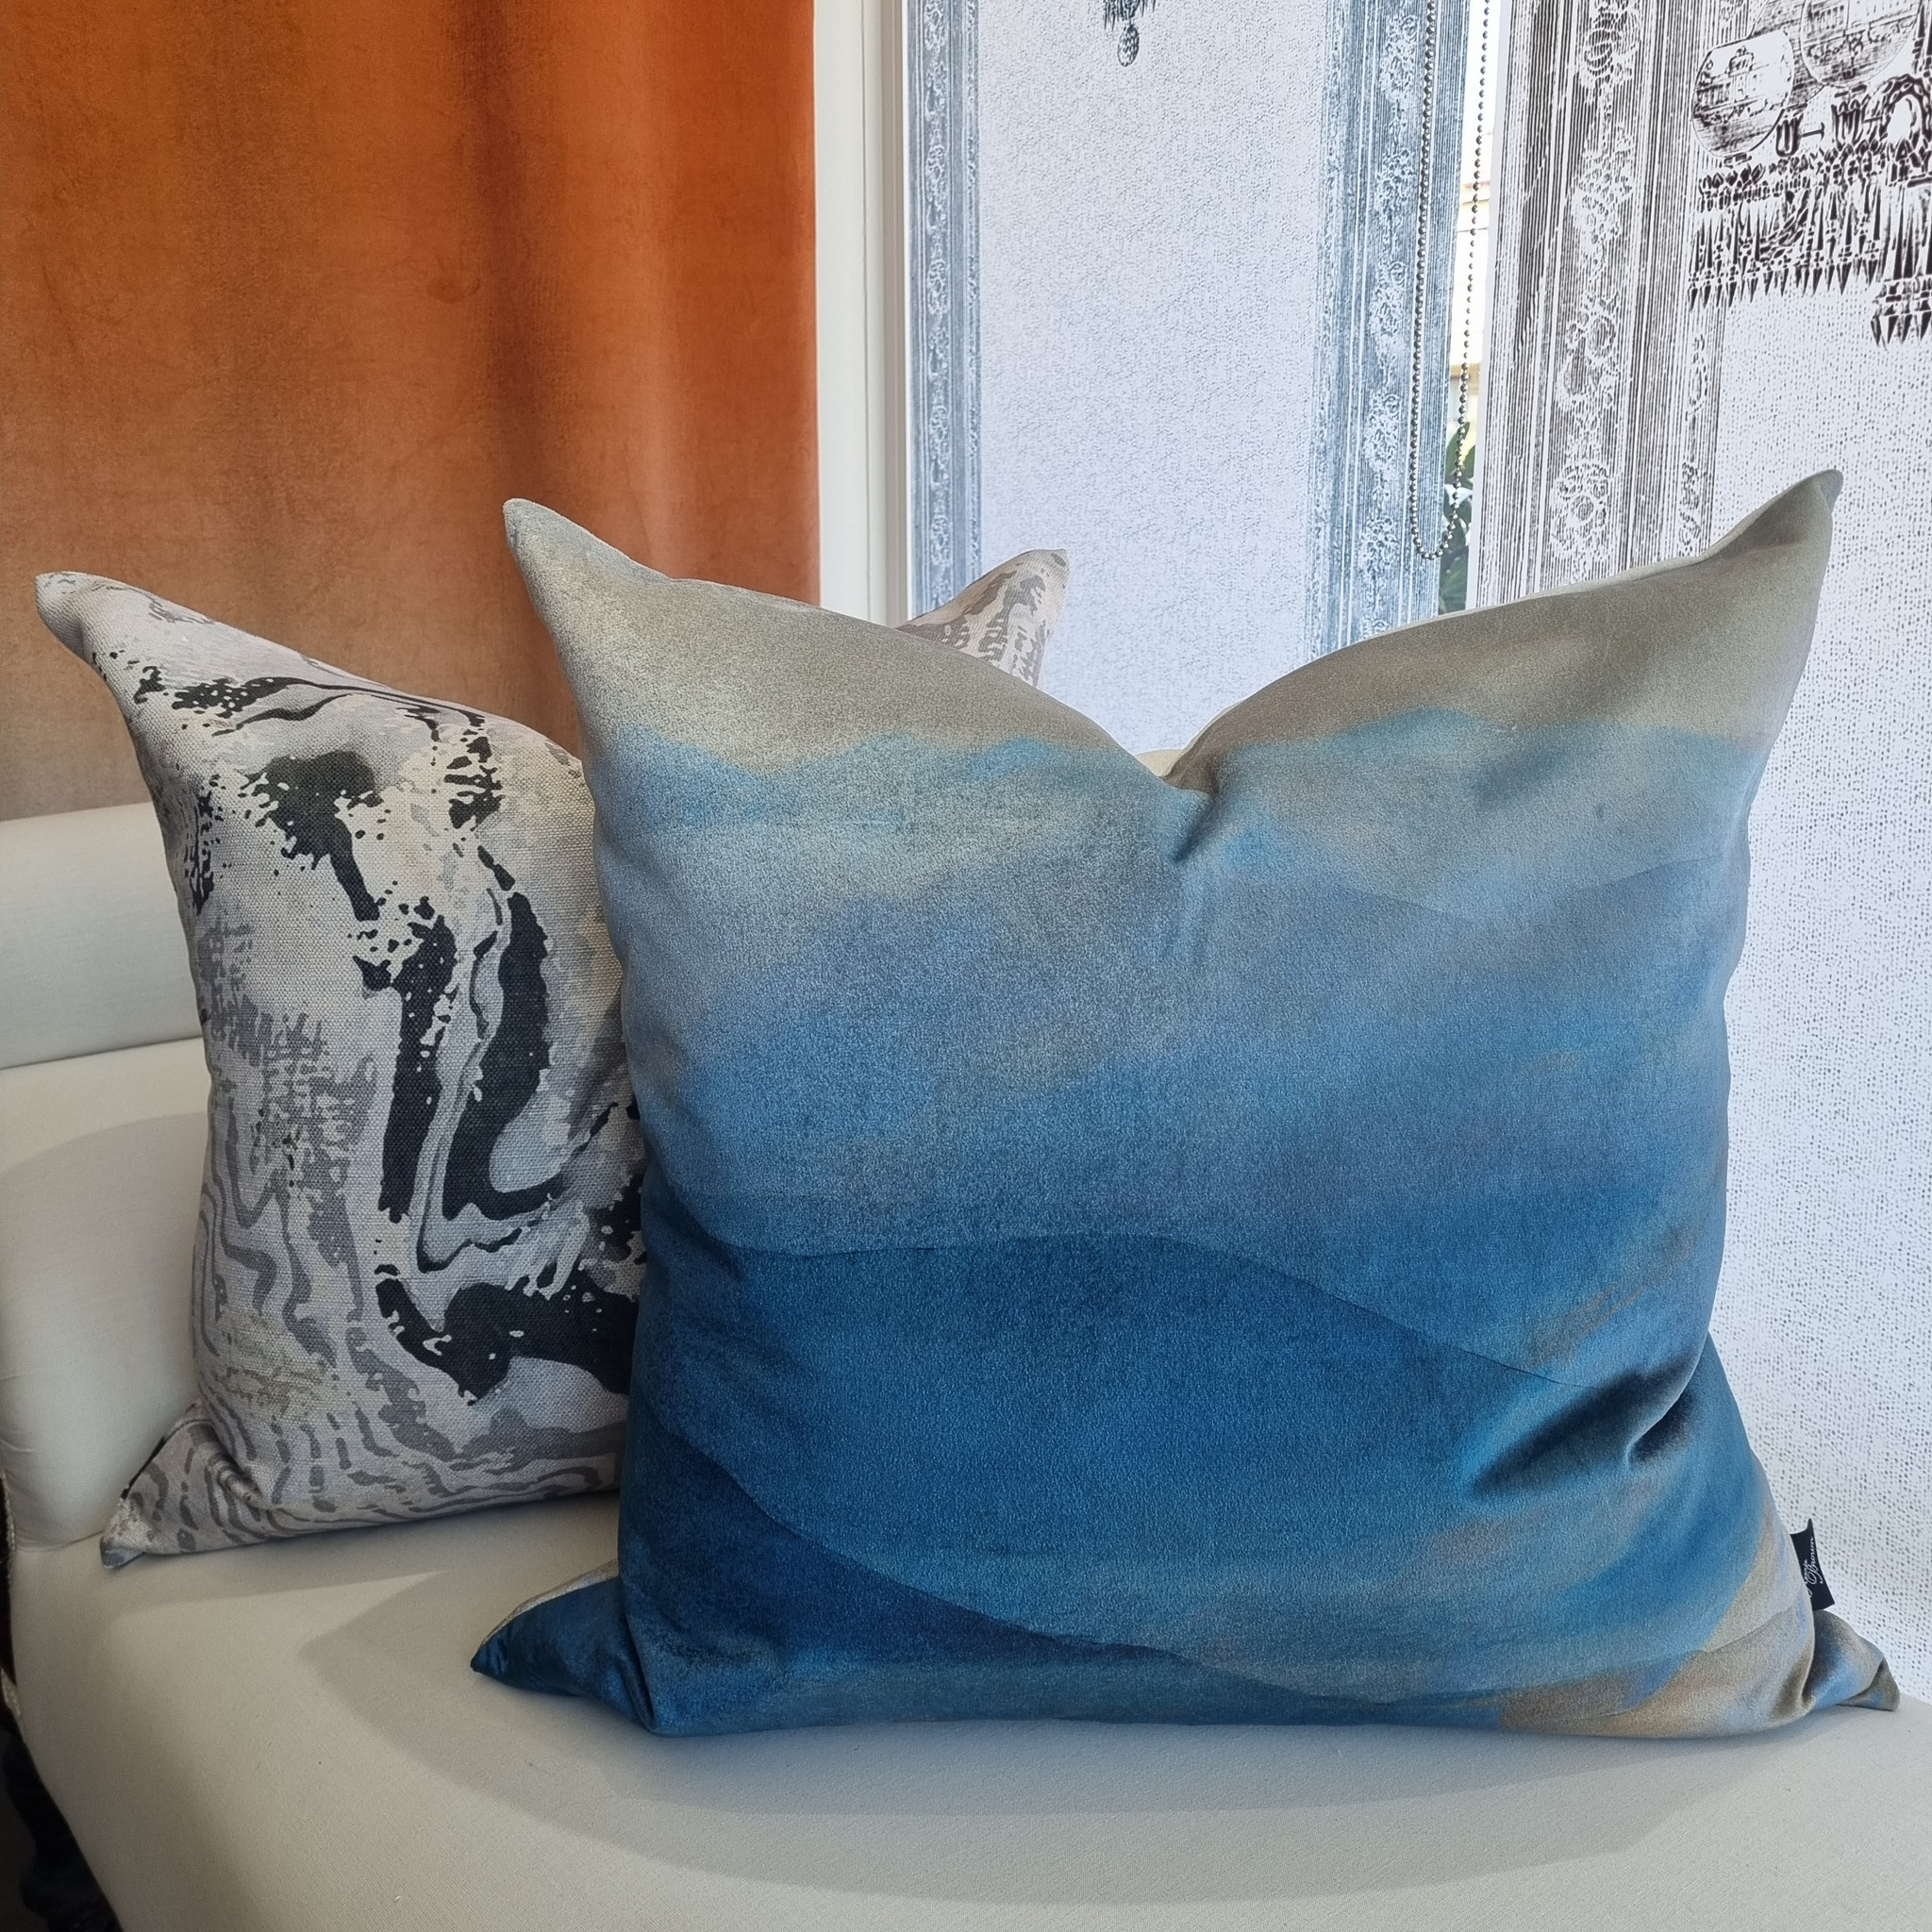  Cushion Cover - Under Construction - Poolside